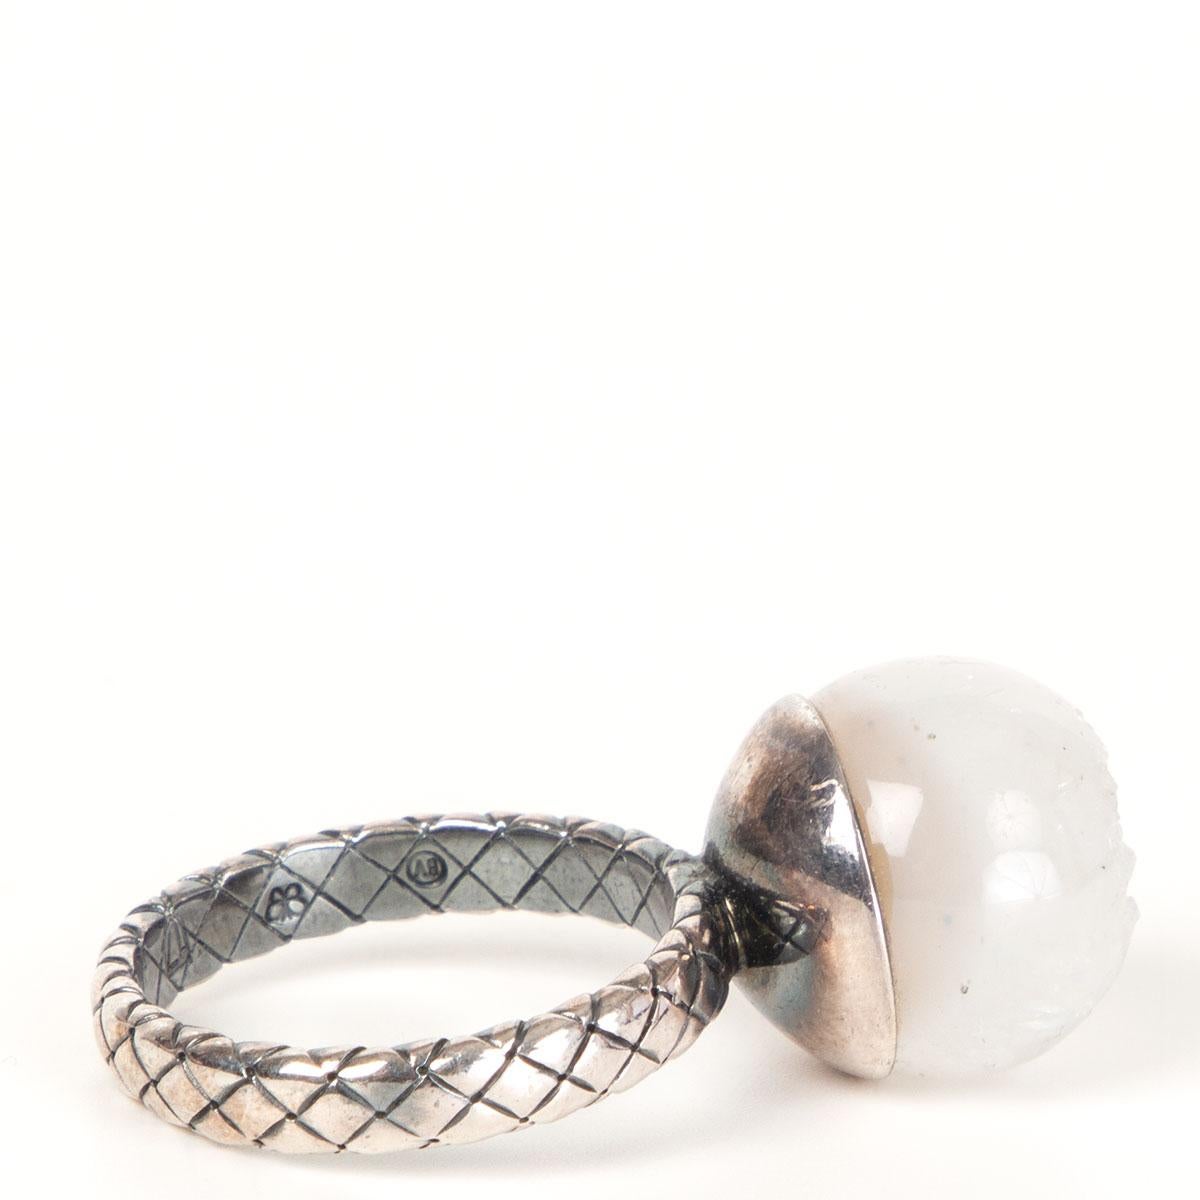 Bottega Veneta Intrecciato sterling silver ball ring with sheer white quartz. Has been worn and is in excellent condition. 

Tag Size 8
Width 1.3cm (0.5in)
Length 1.3cm (0.5in)
